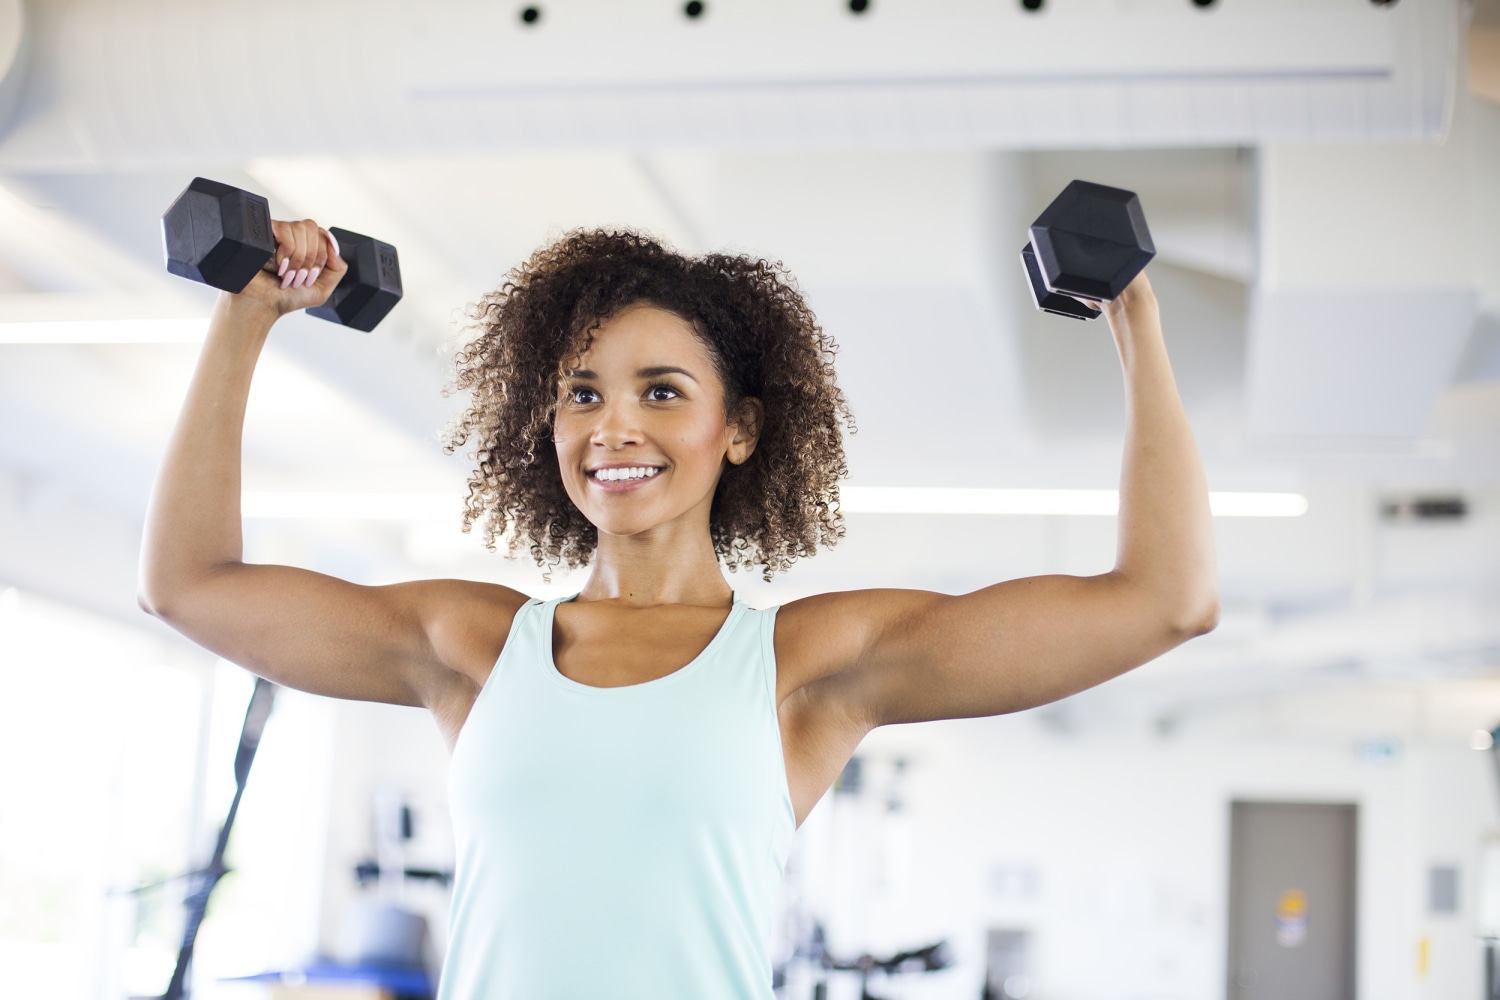 20 Best Arm Exercises to Tone and Build Upper Body Muscle